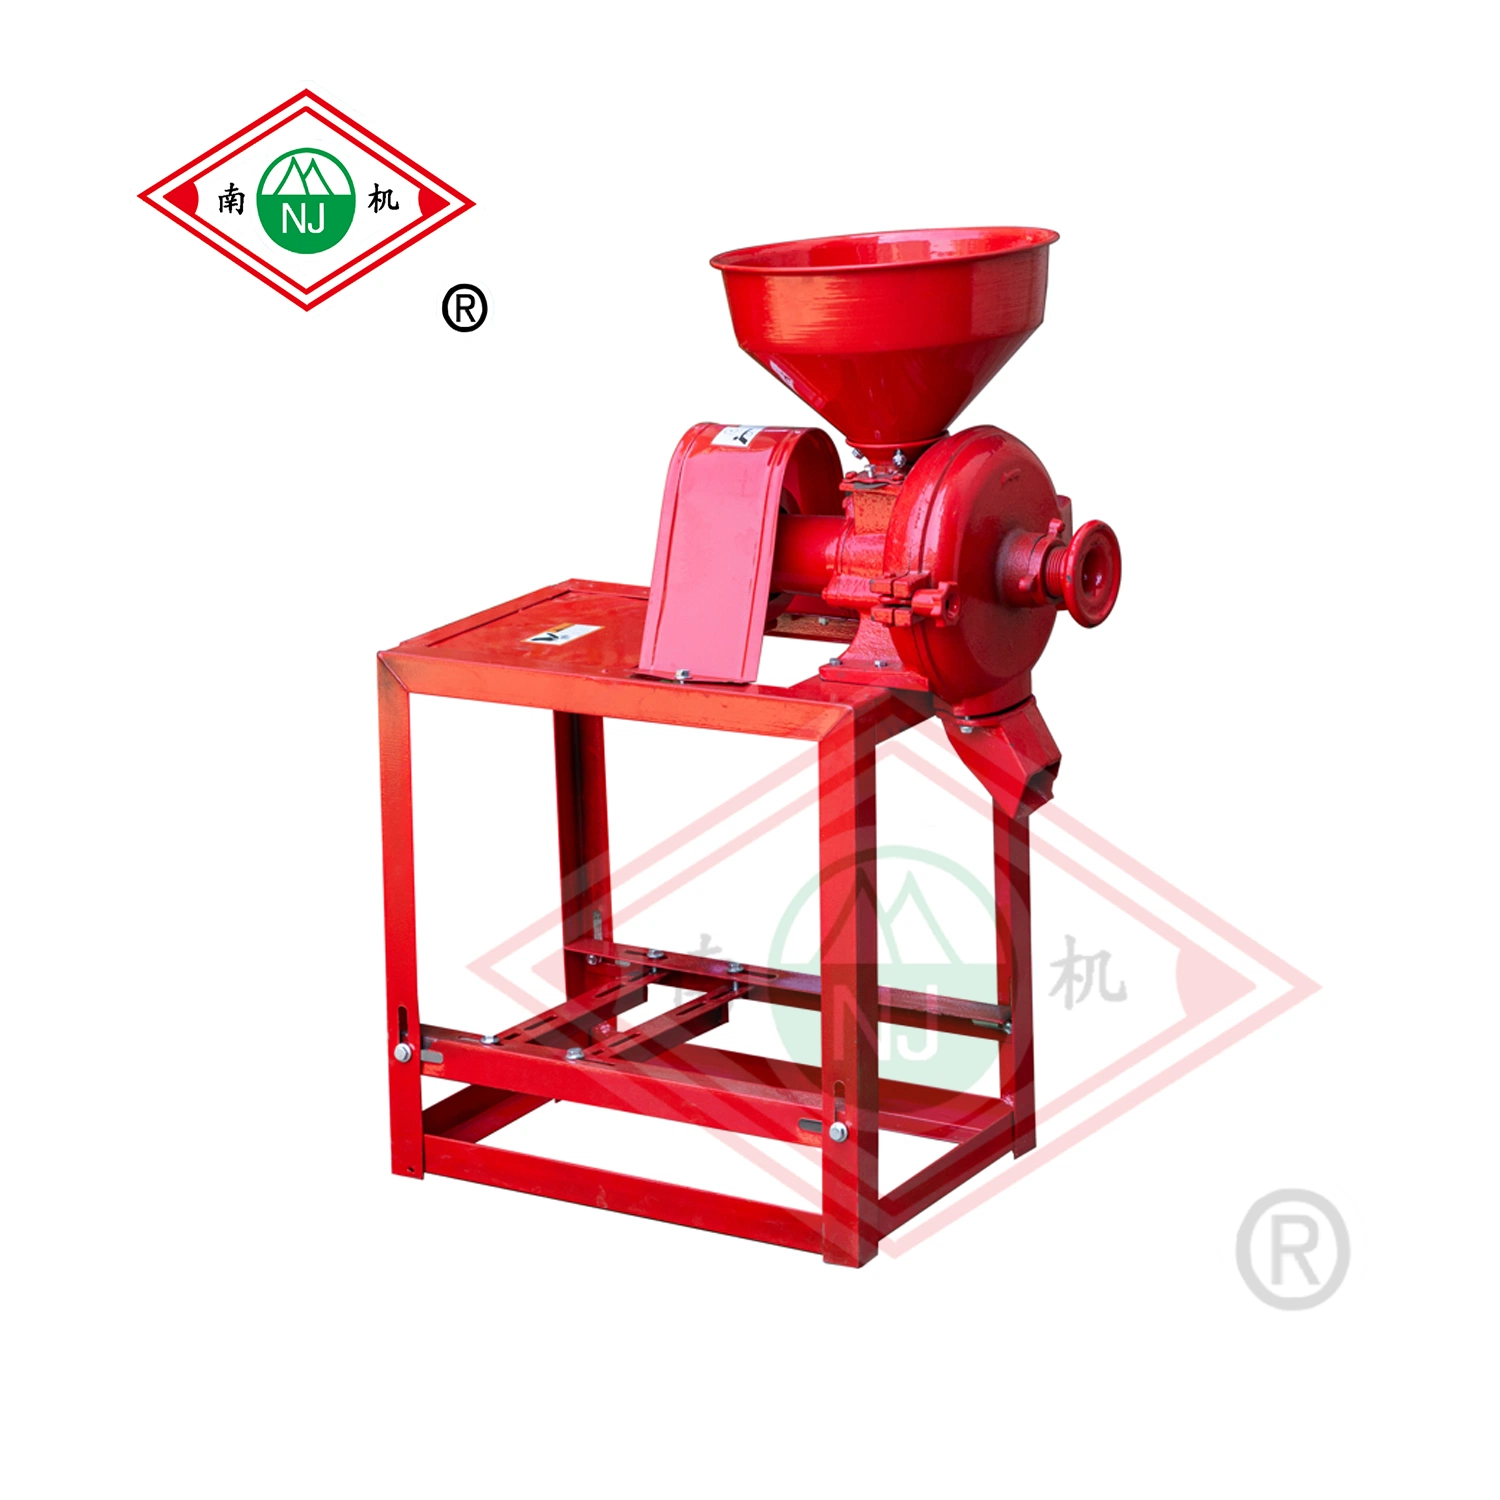 Dual-Purpose Dry and Wet Use Grain Grinder Pulping Machine for Home Use Direct Factory Supply